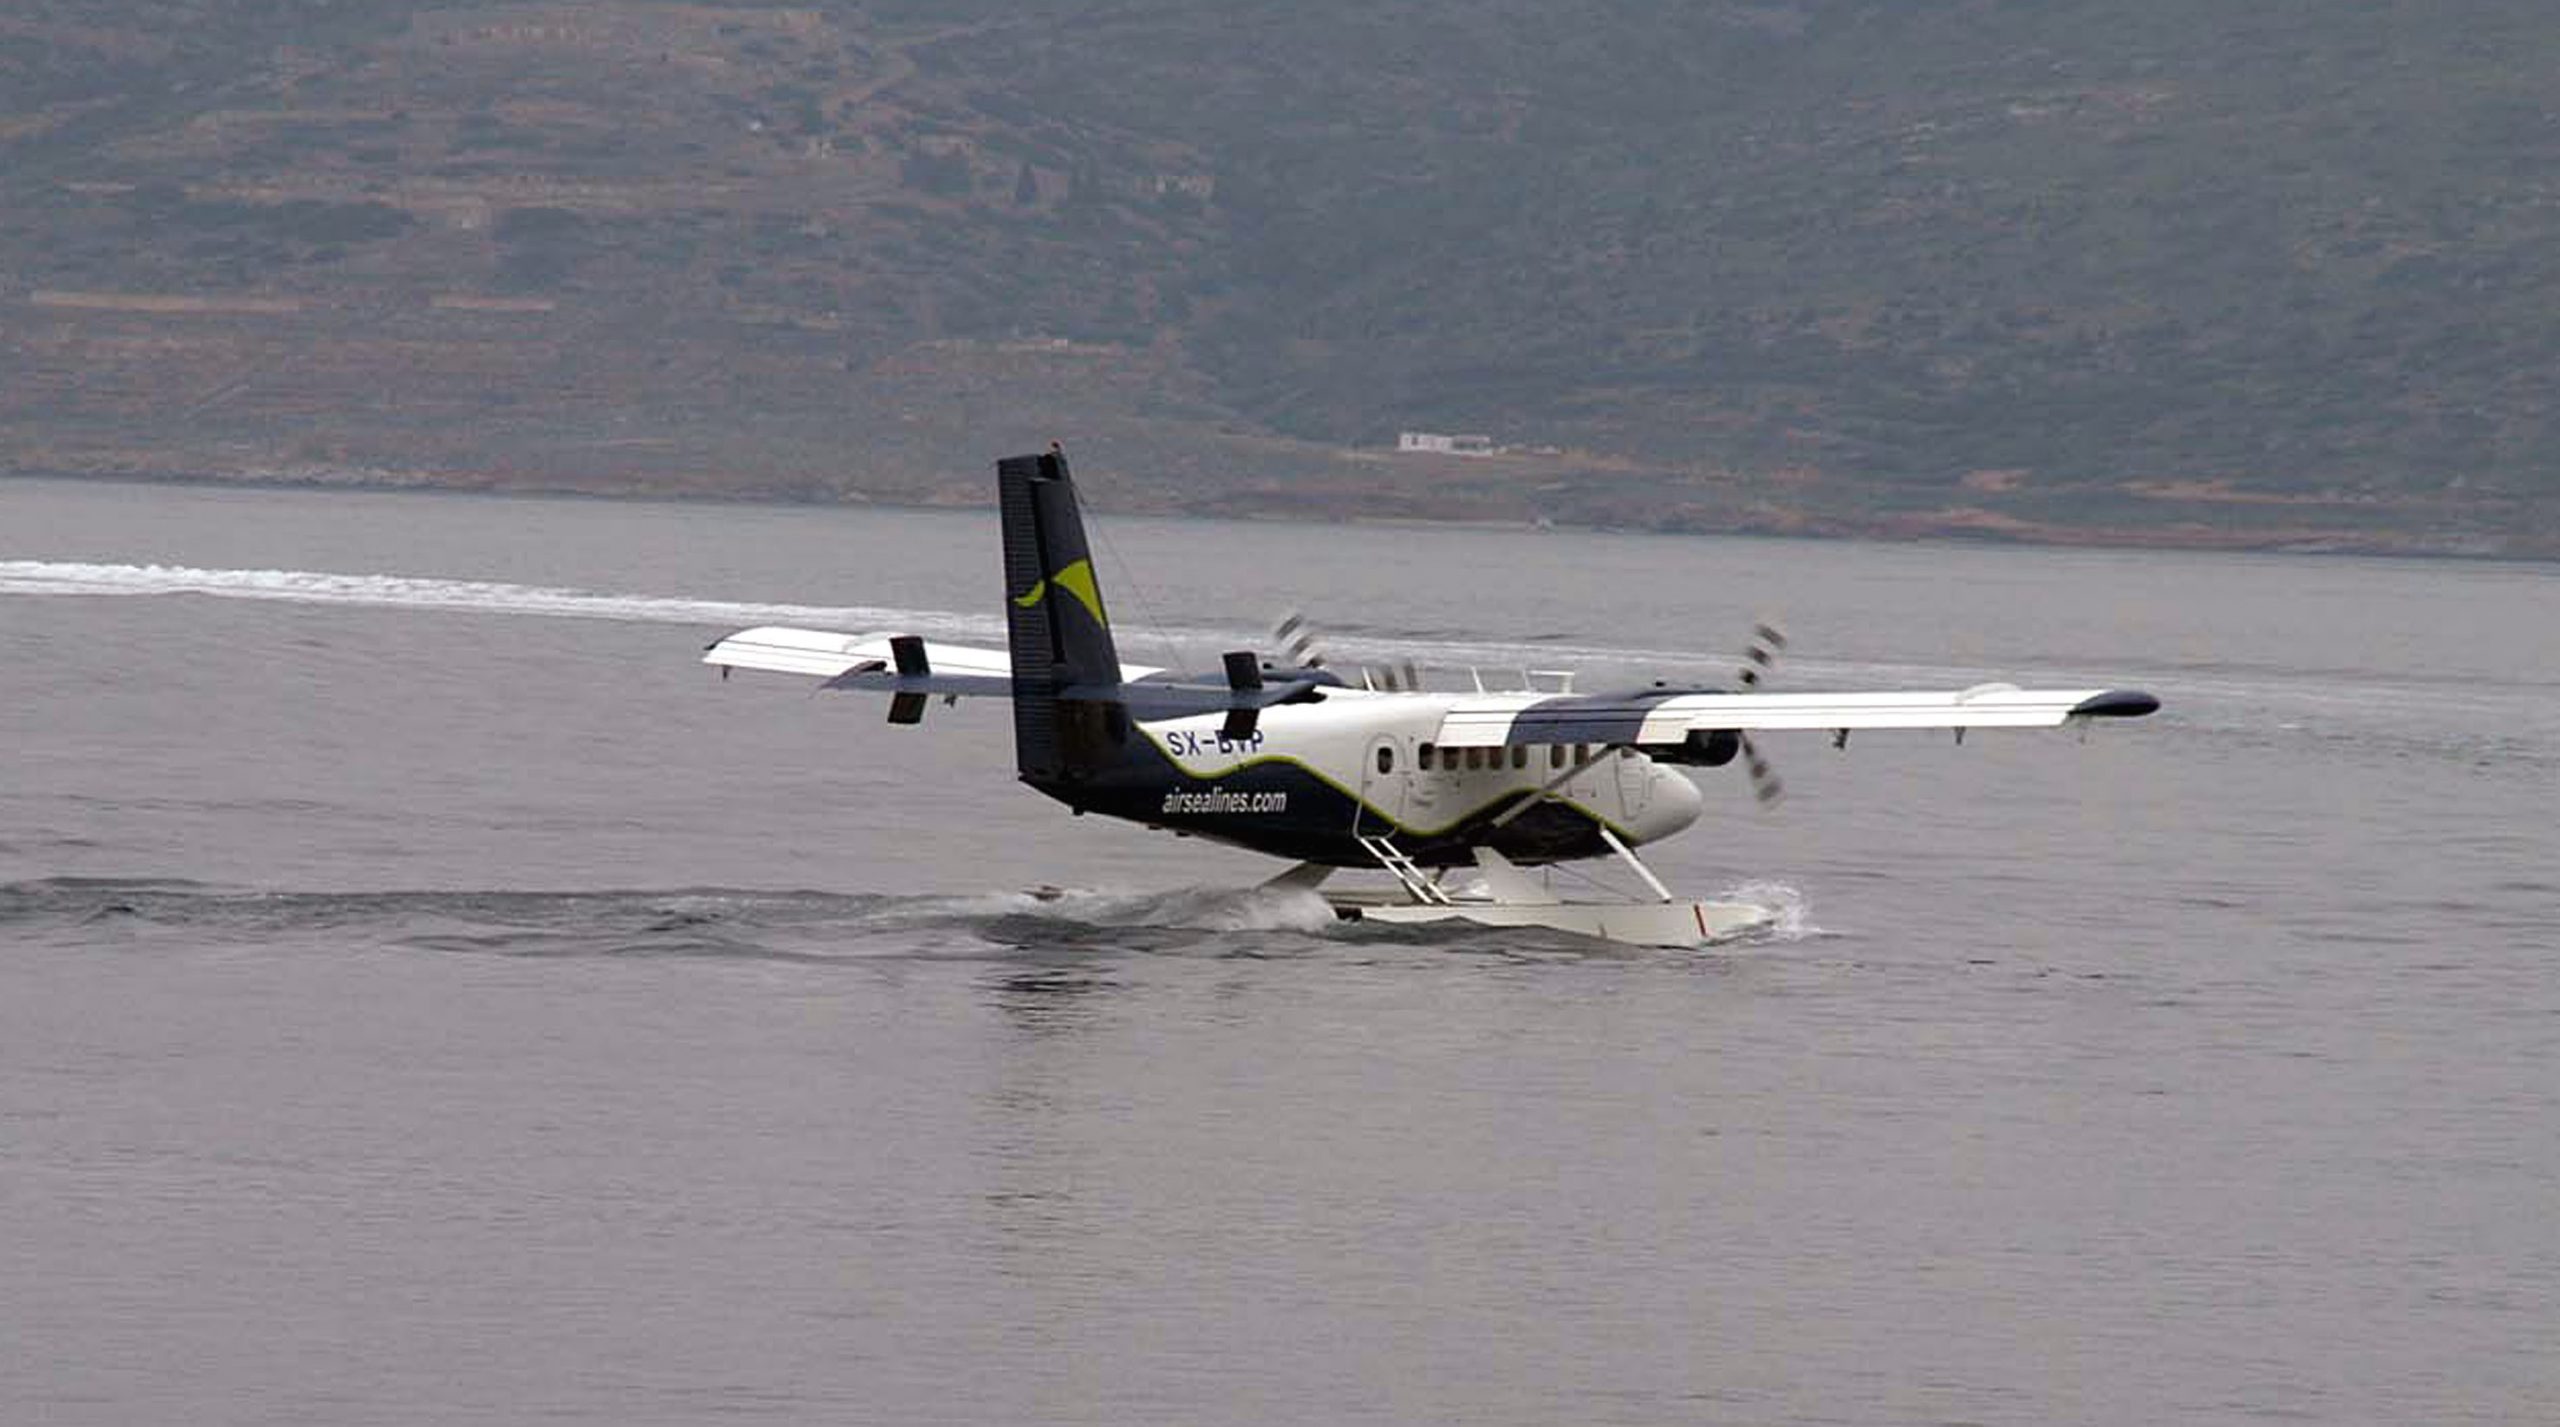 Latest attempt to inaugurate seaplane routes in Greece coming in Sept. 